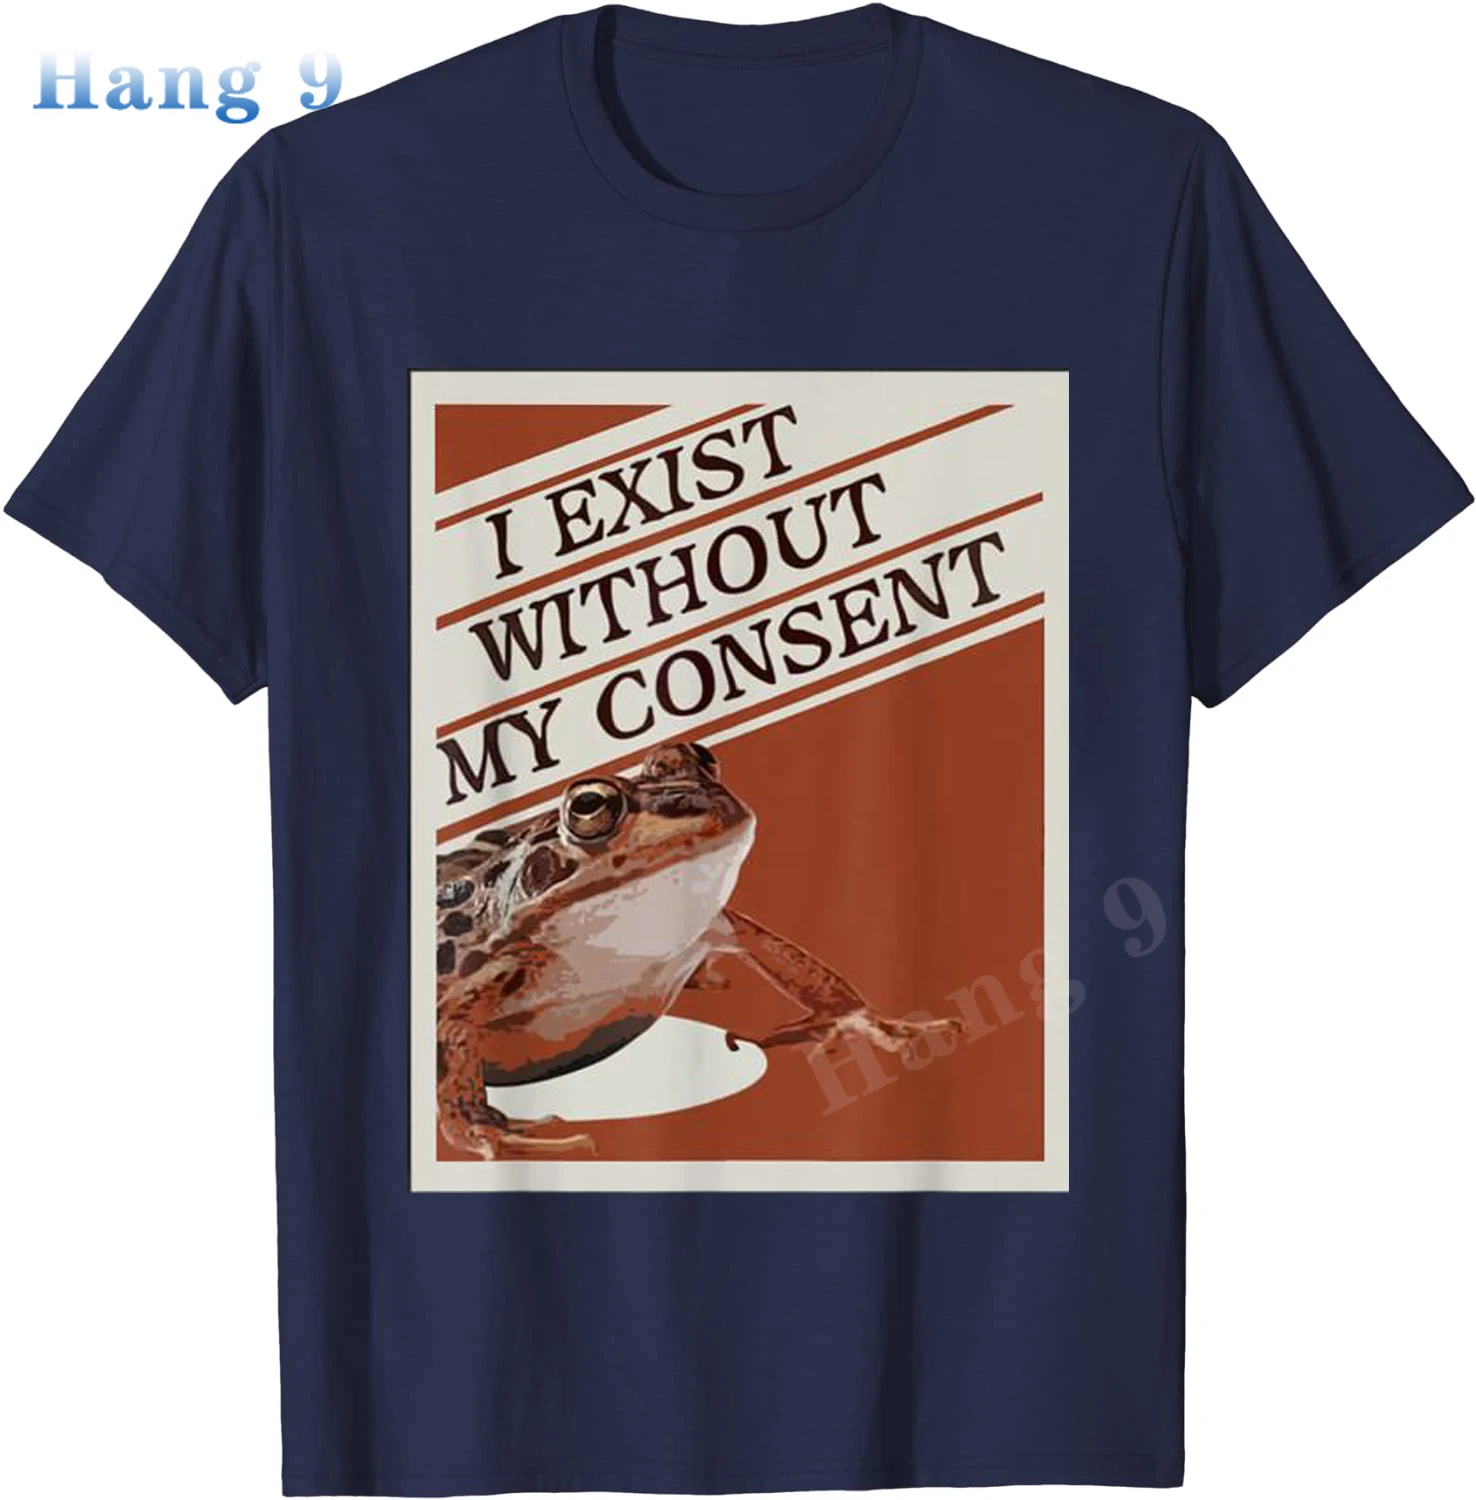 I Exist Without My Consent Frog Funny Surreal Meme Me IRL T-Shirt Tops Shirts Prevailing Print Cotton Mens Tshirts Casual